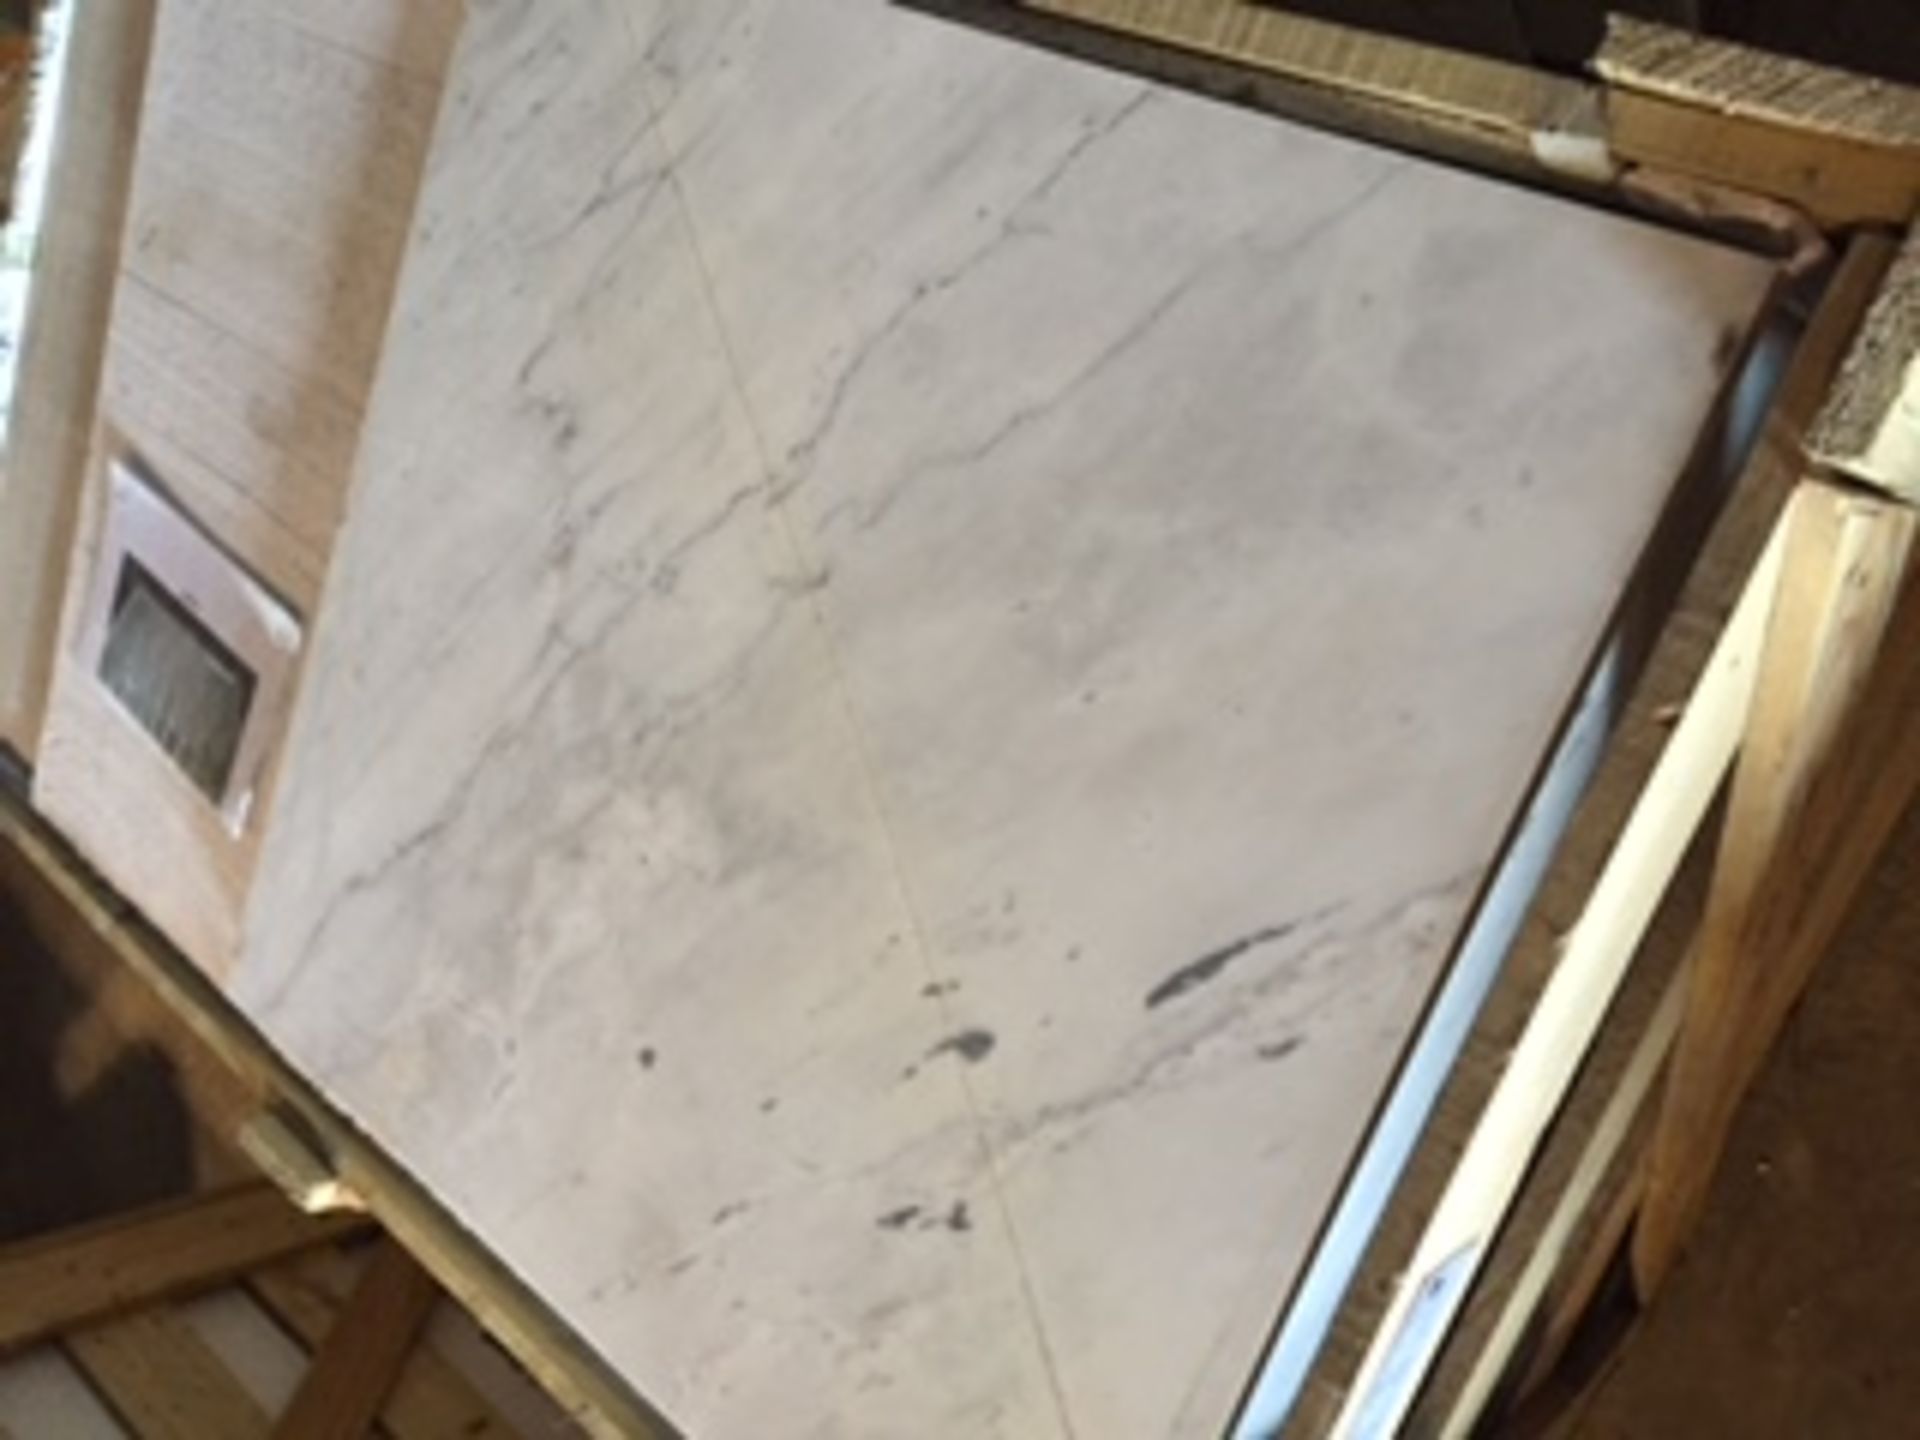 Quantity of 49 Royal Veined Marble Slabs 60cmx60cmx2 cm - Image 2 of 3